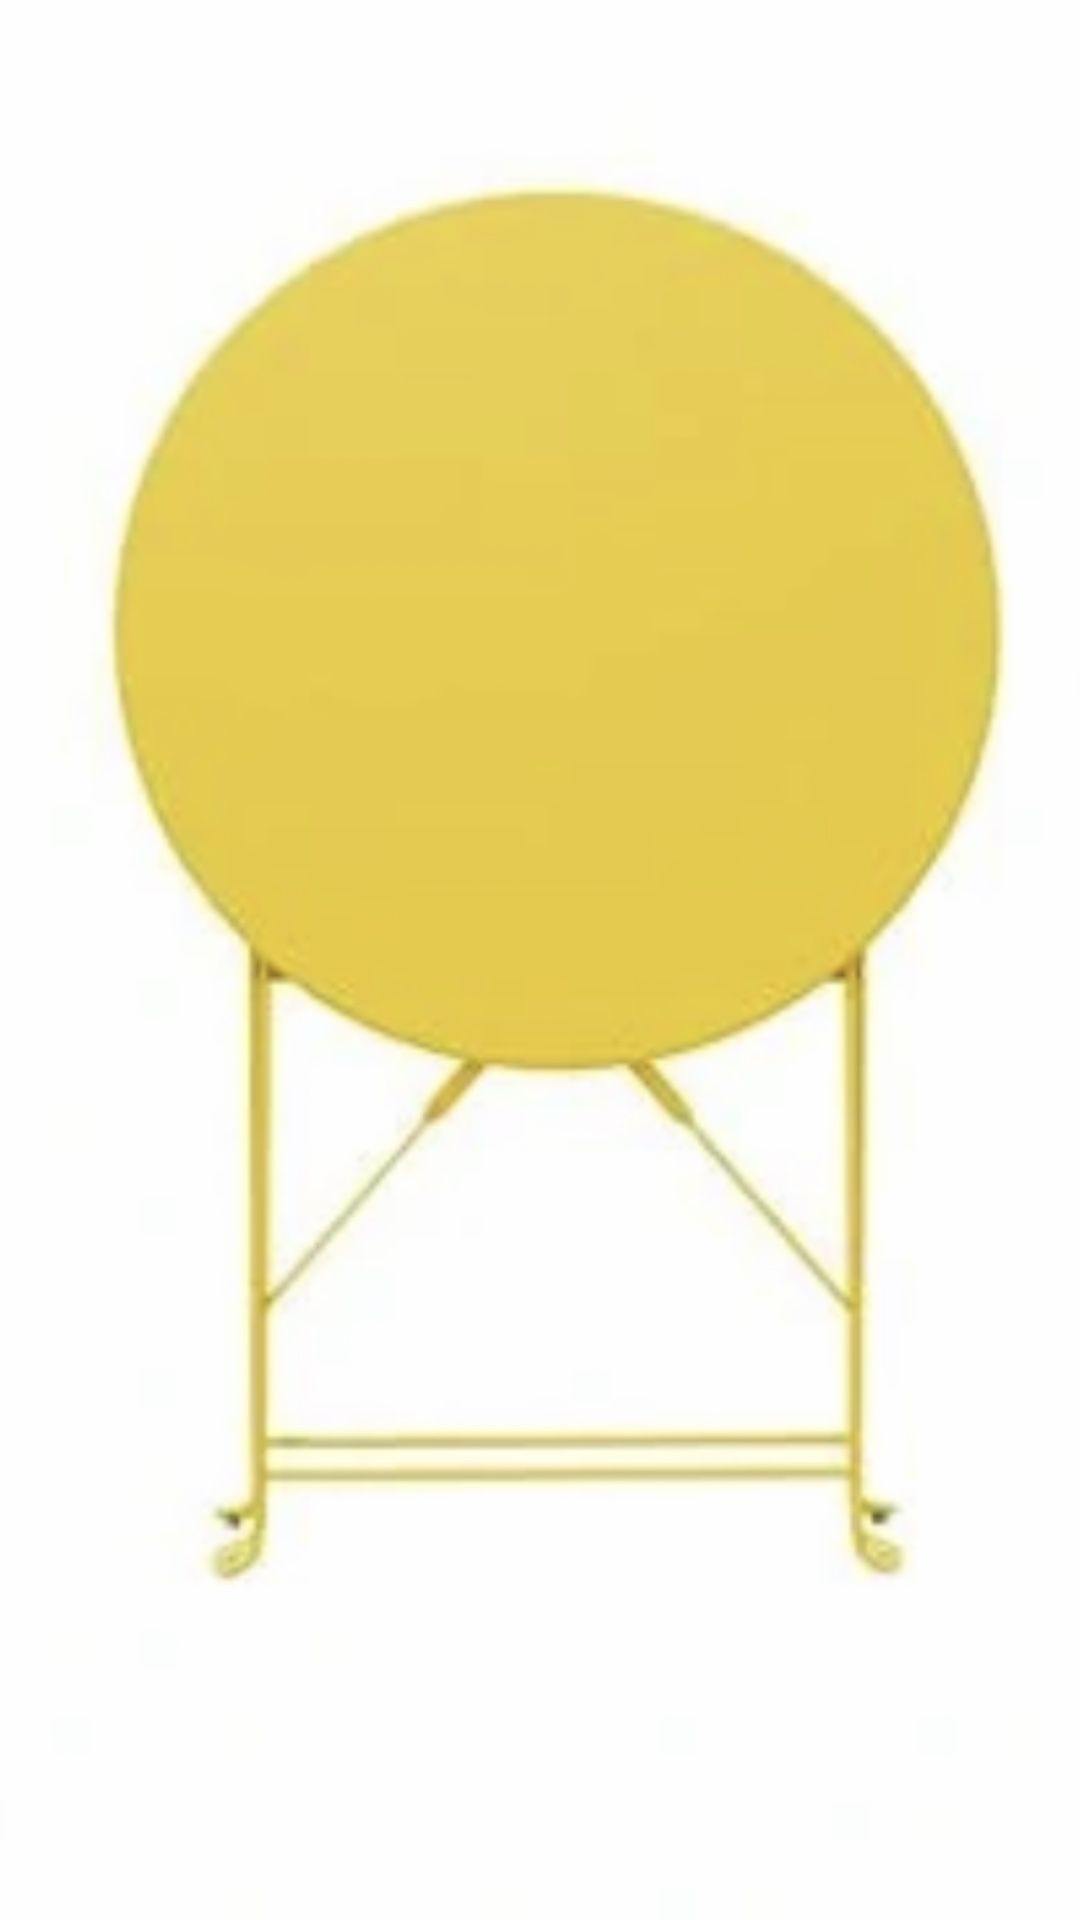 round Steel outdoor restaurant folding table - Yellow Never Used 